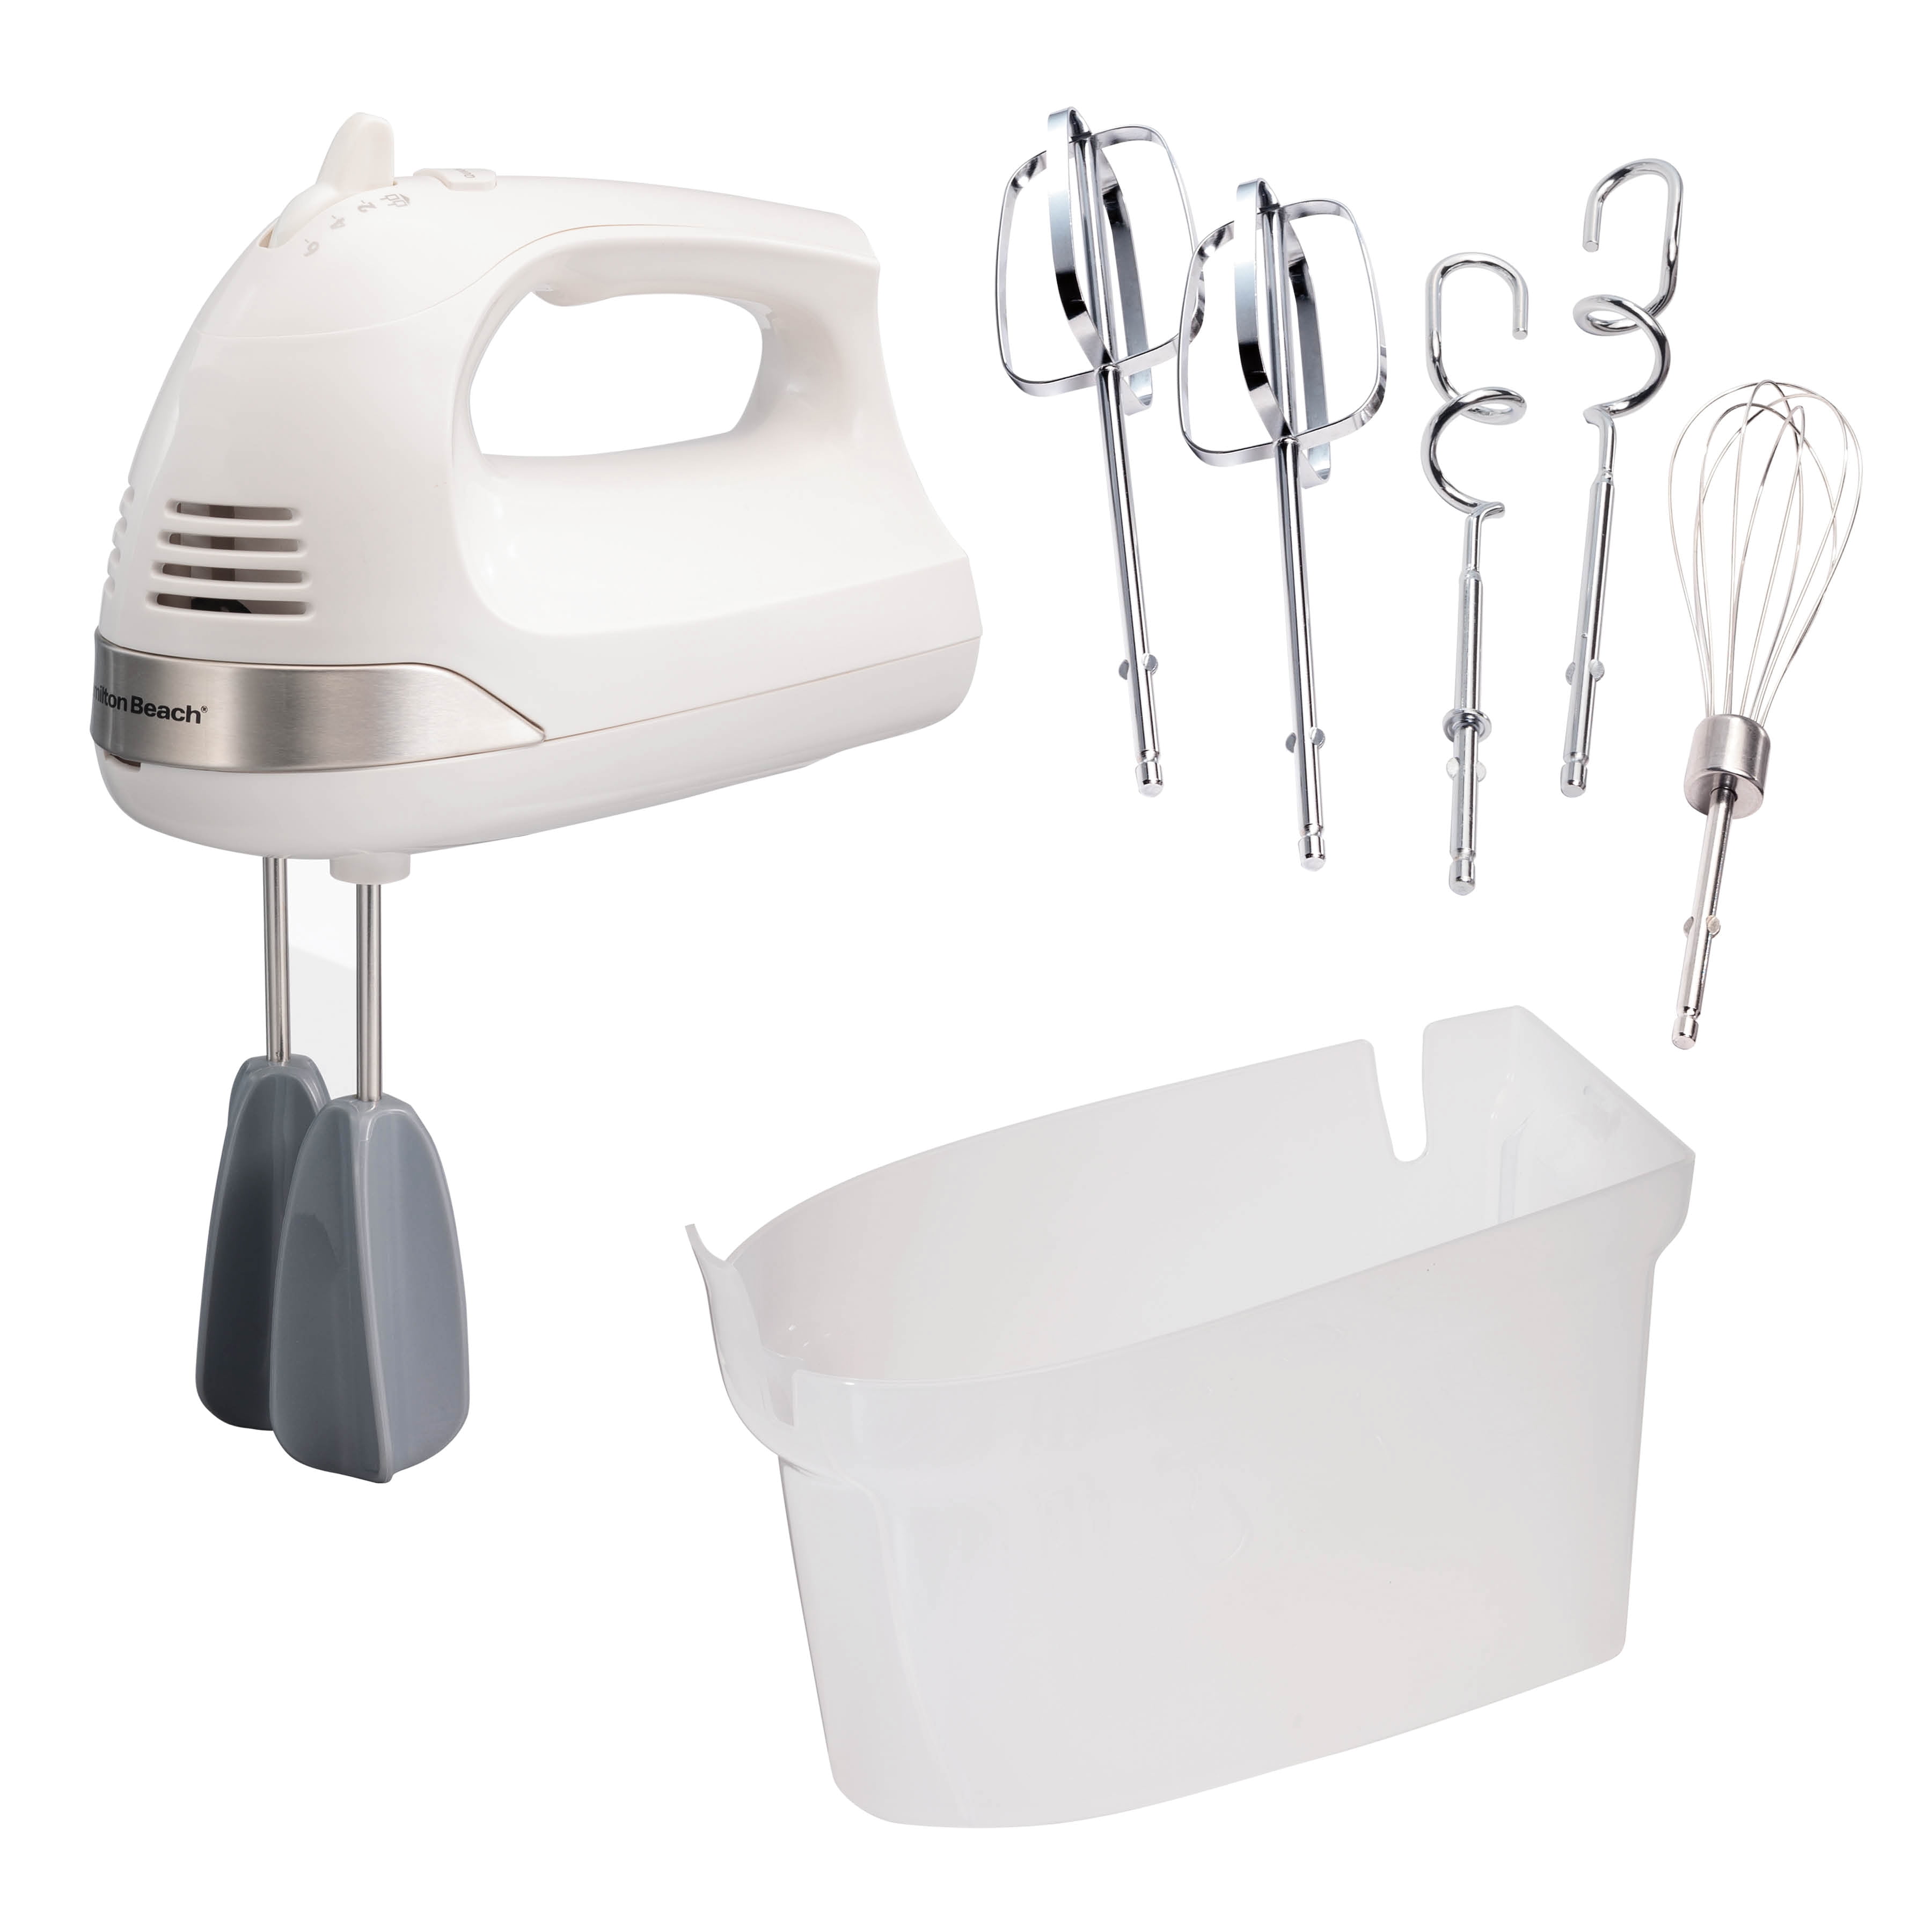 1pc Electric Hand Mixer With Whisk, Traditional Beaters, Snap-On Storage  Case, Hand Mixer Electric Handheld, Mixers Kitchen Electric Hand Mixer, 300  W